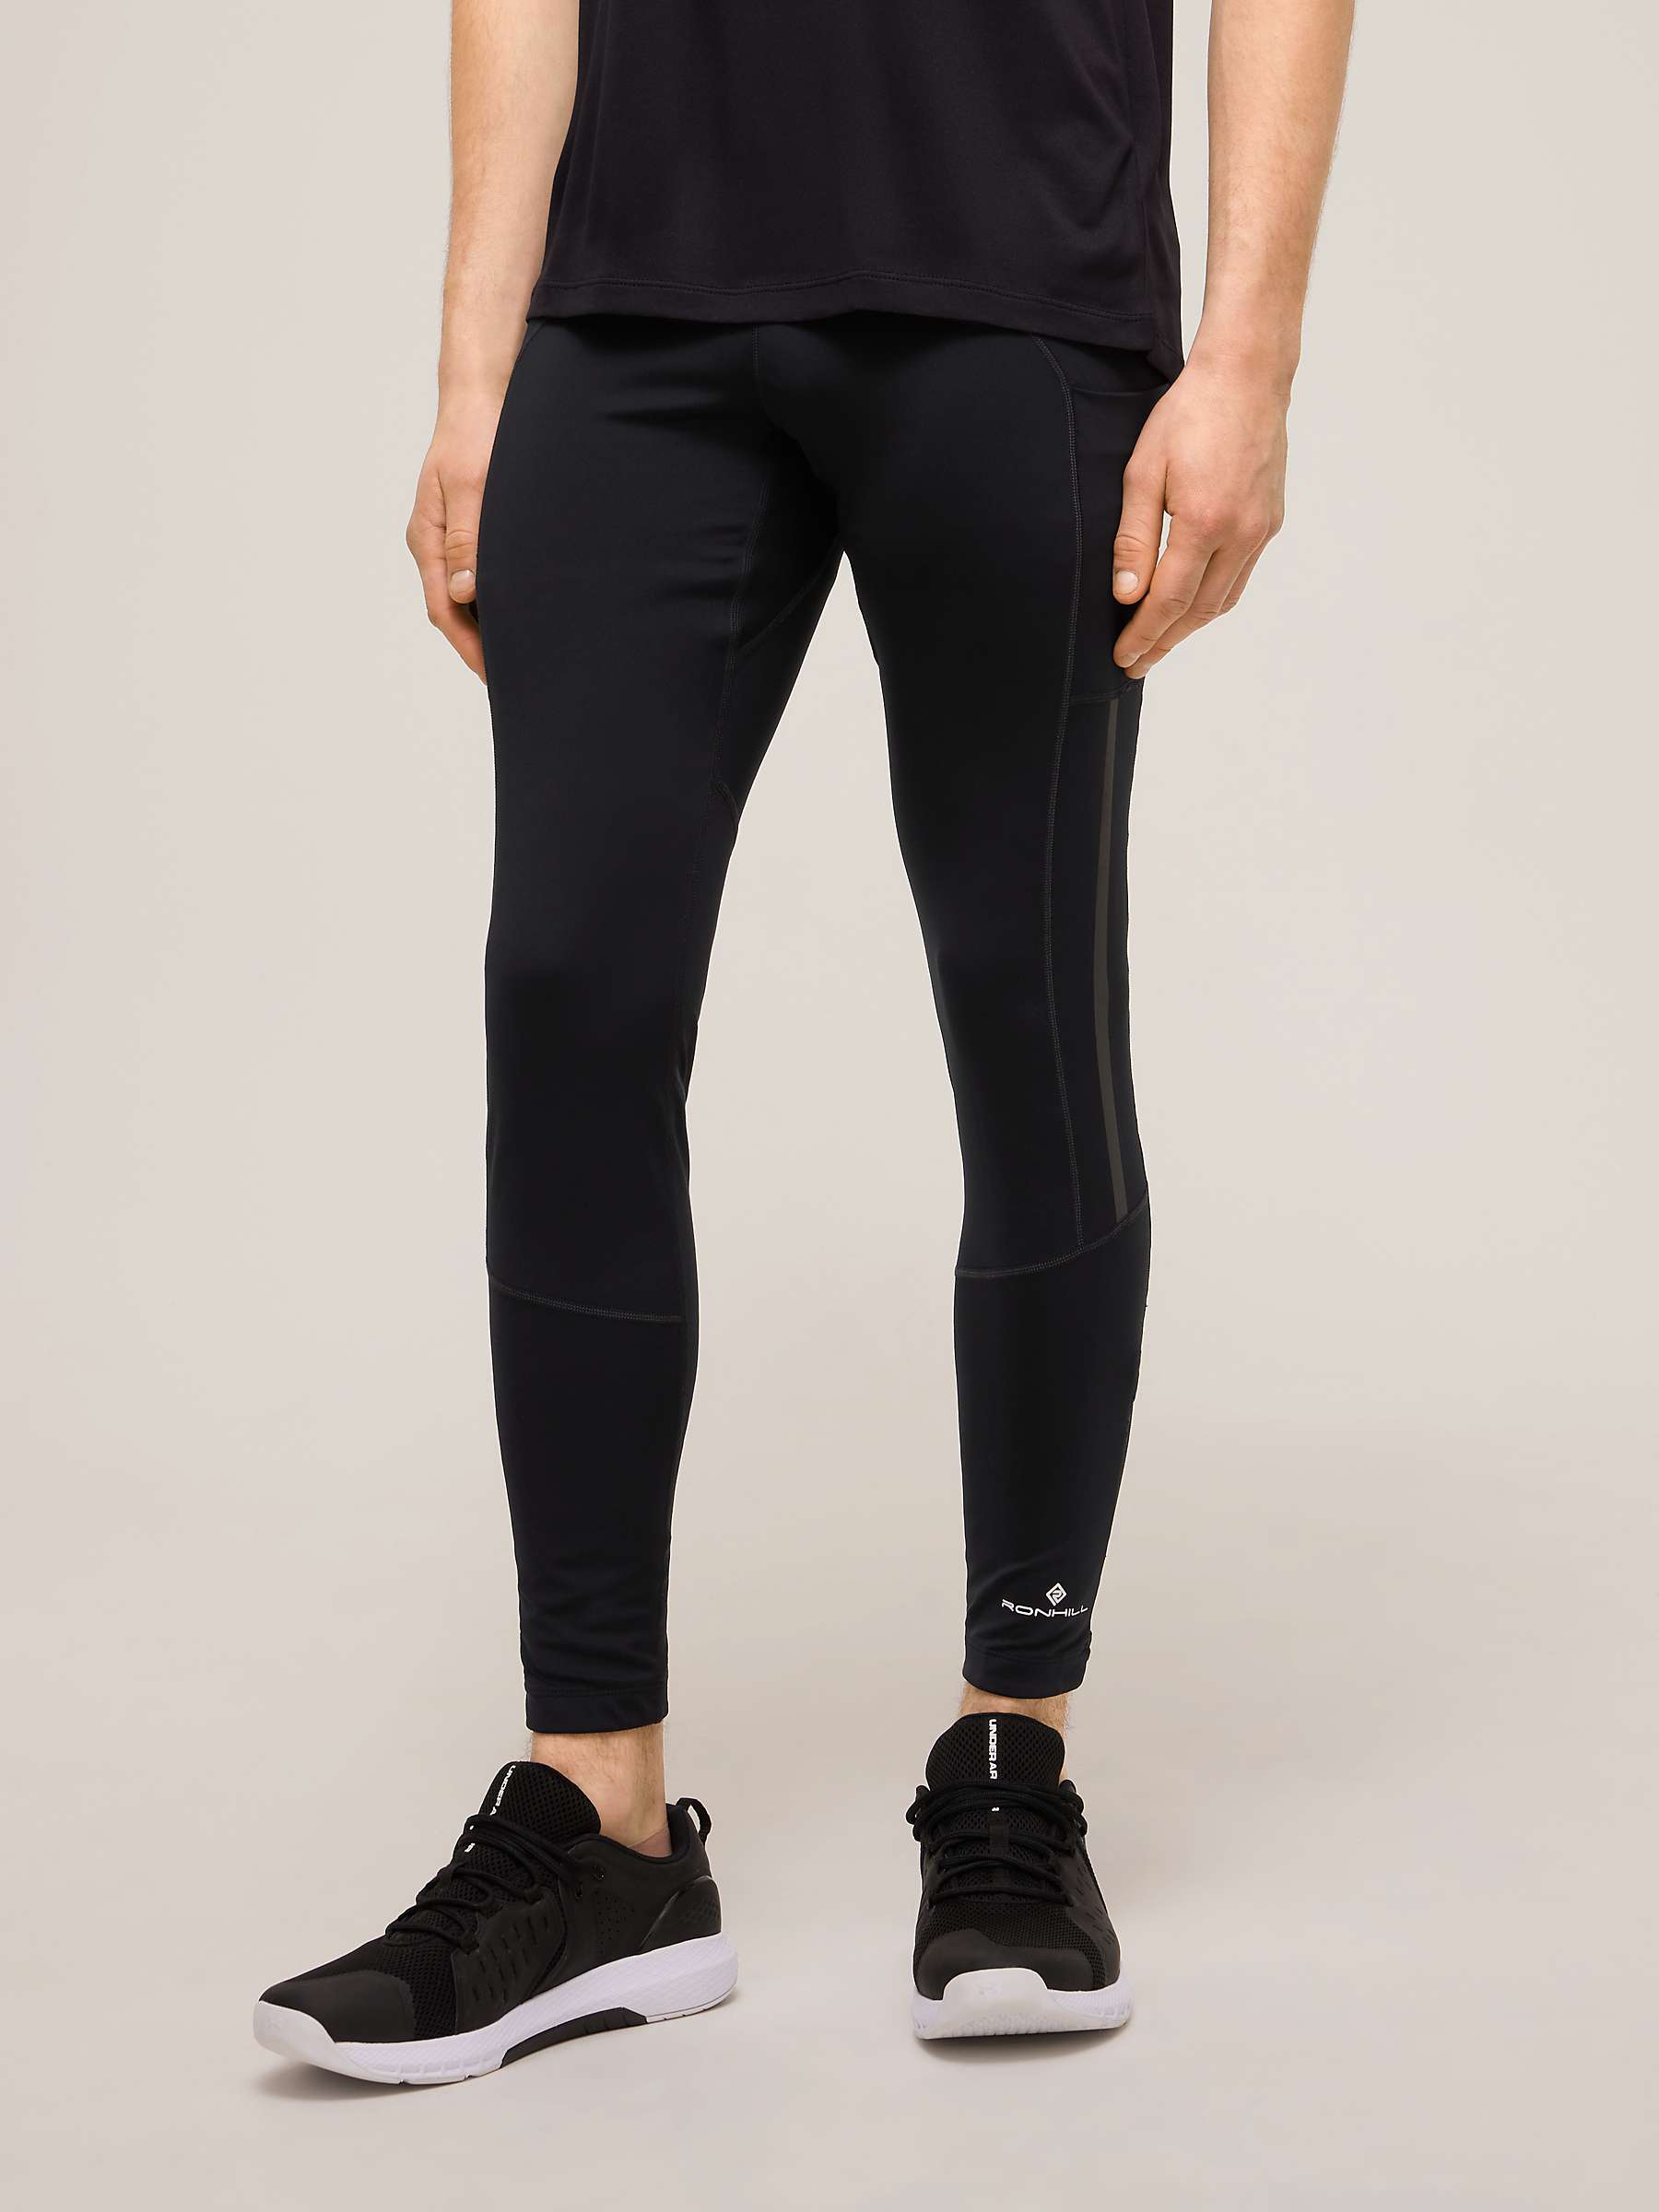 Buy Ronhill Tech Revive Stretch Running Leggings Online at johnlewis.com